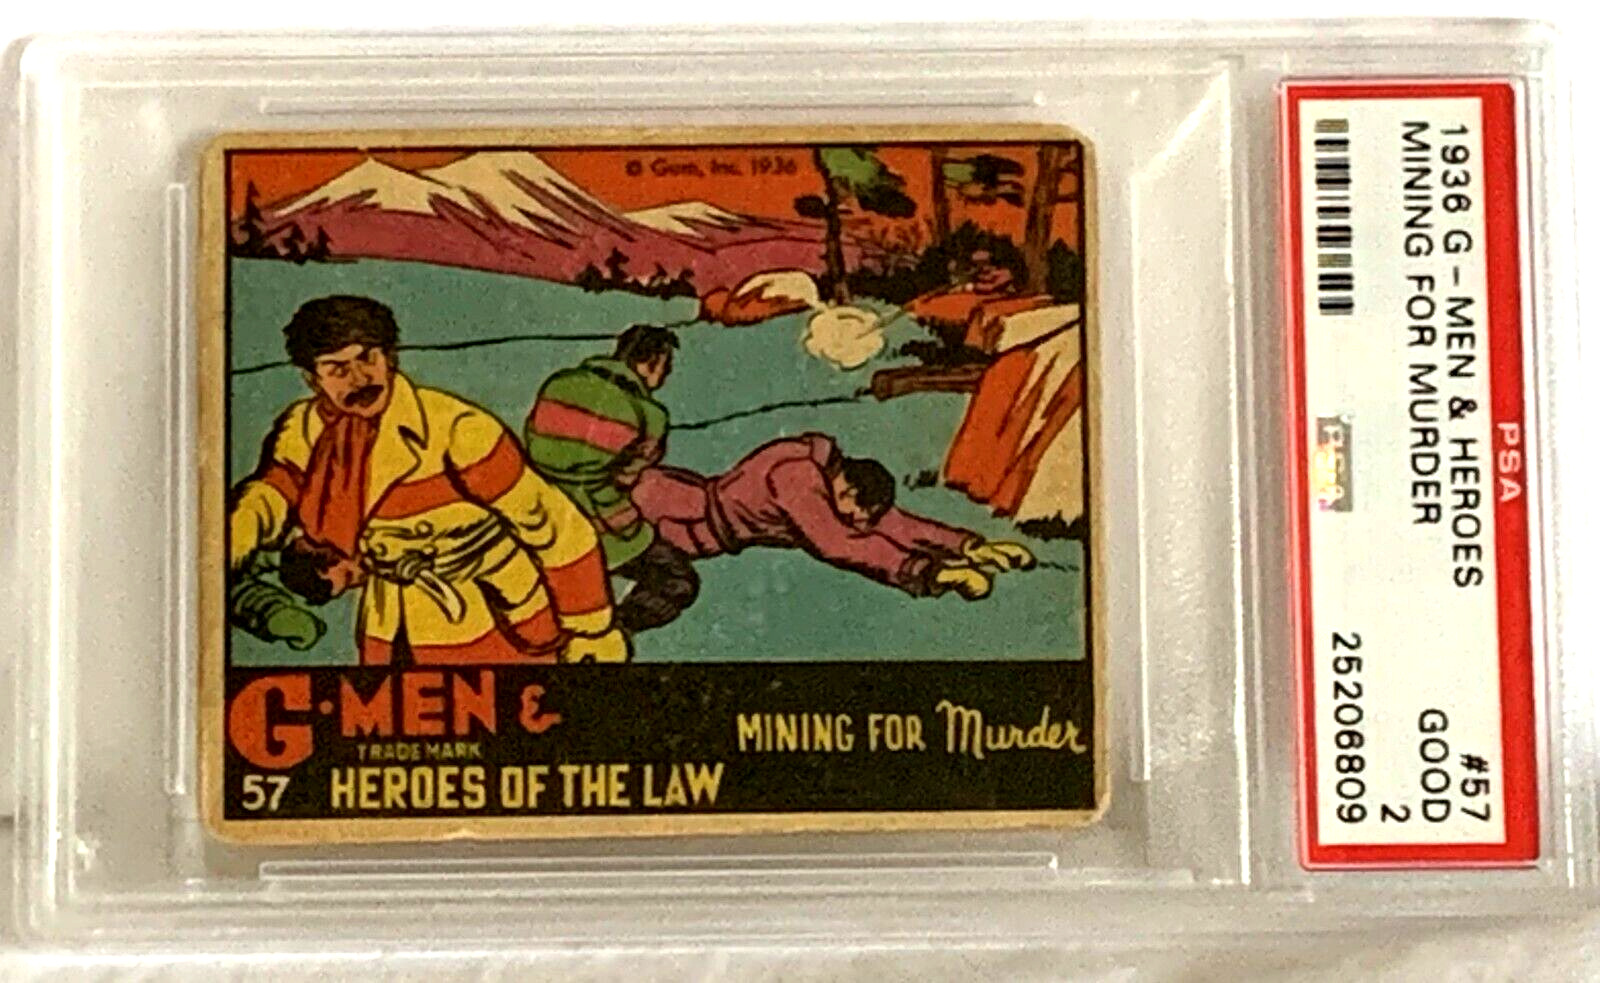 1936 Gum. G-Men Heroes of The Law. Card # 57  PSA 2.  